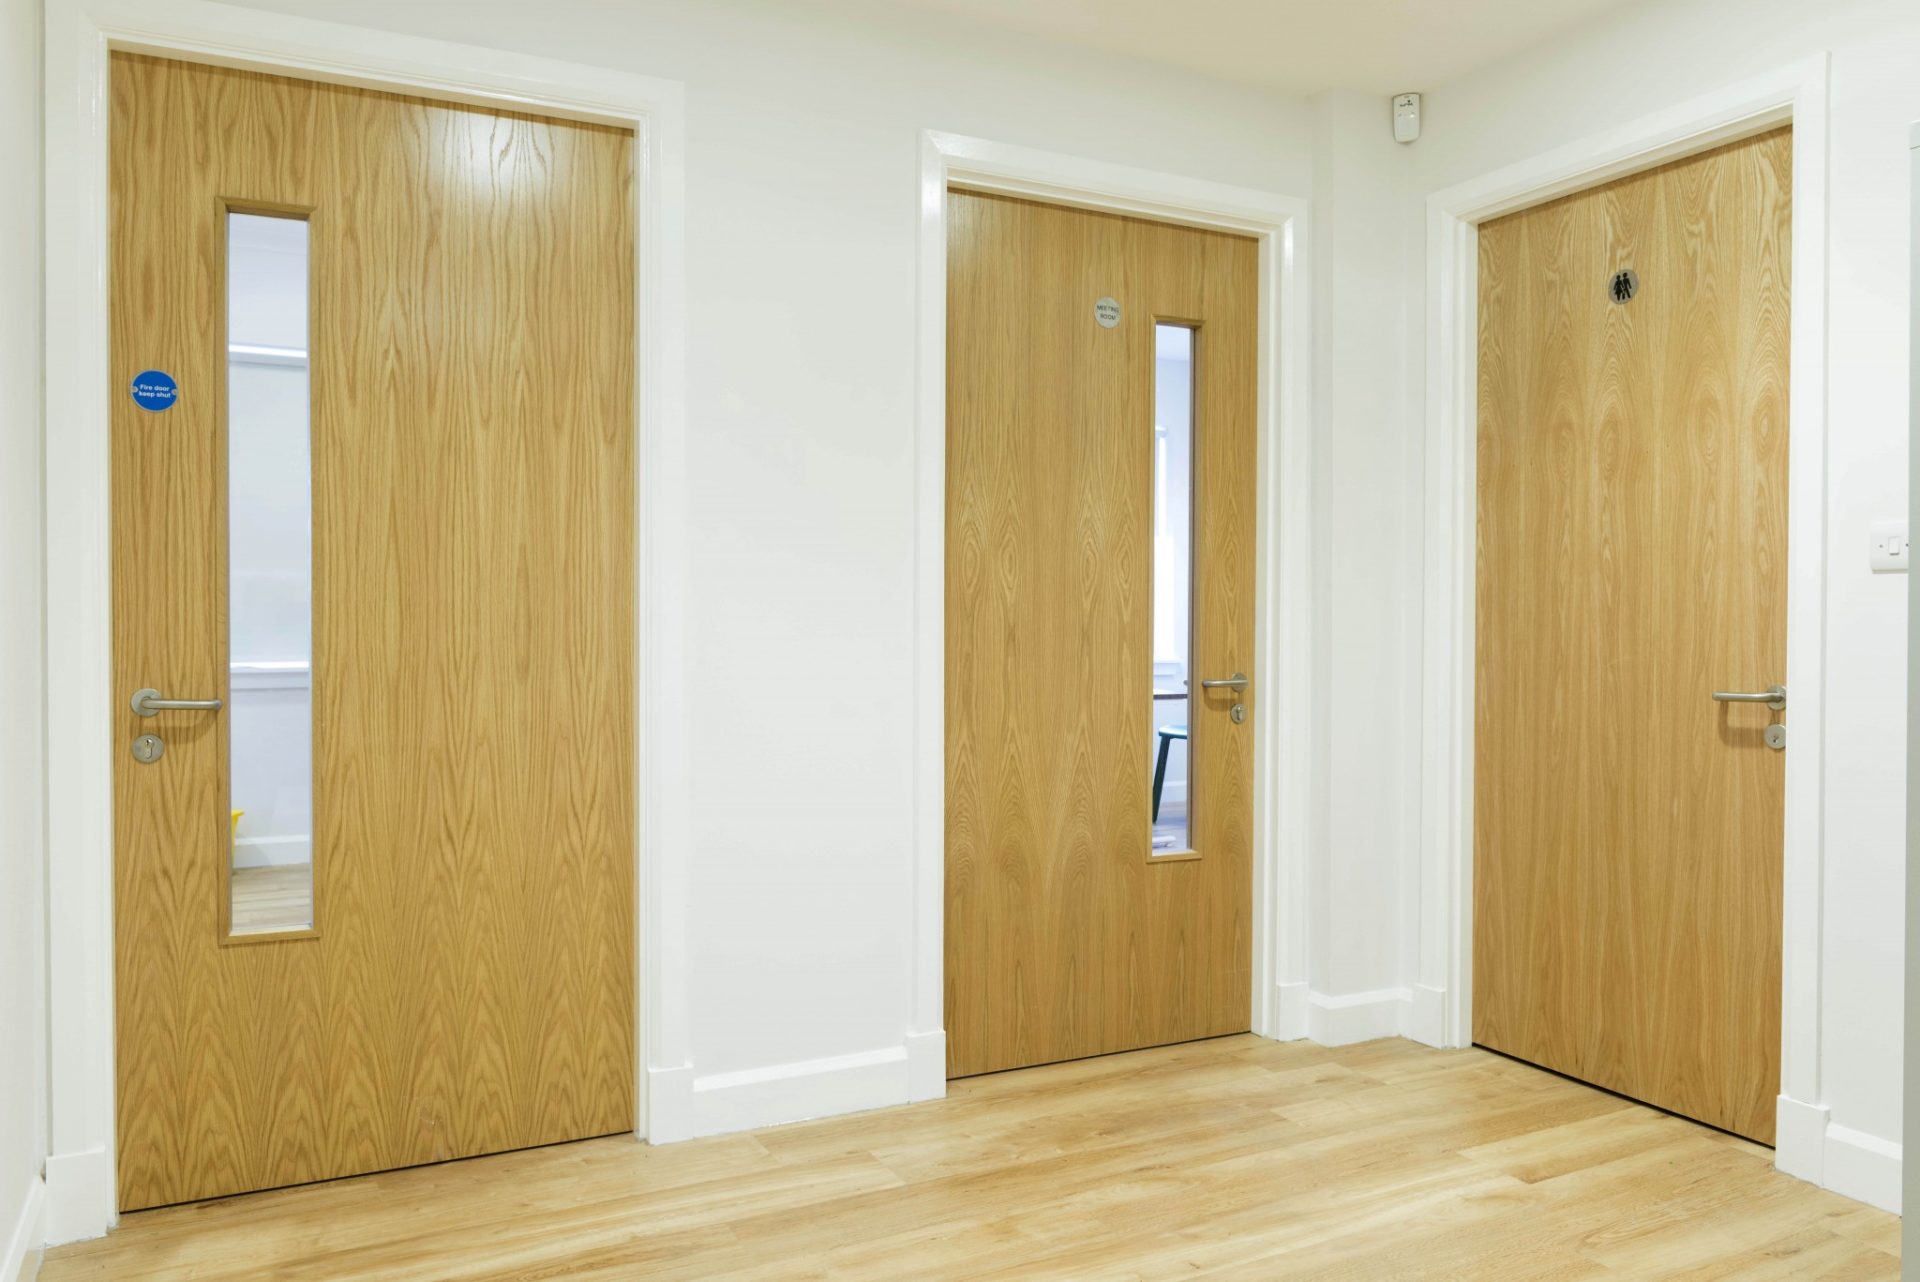 What CE marking means for fire doors and doorsets